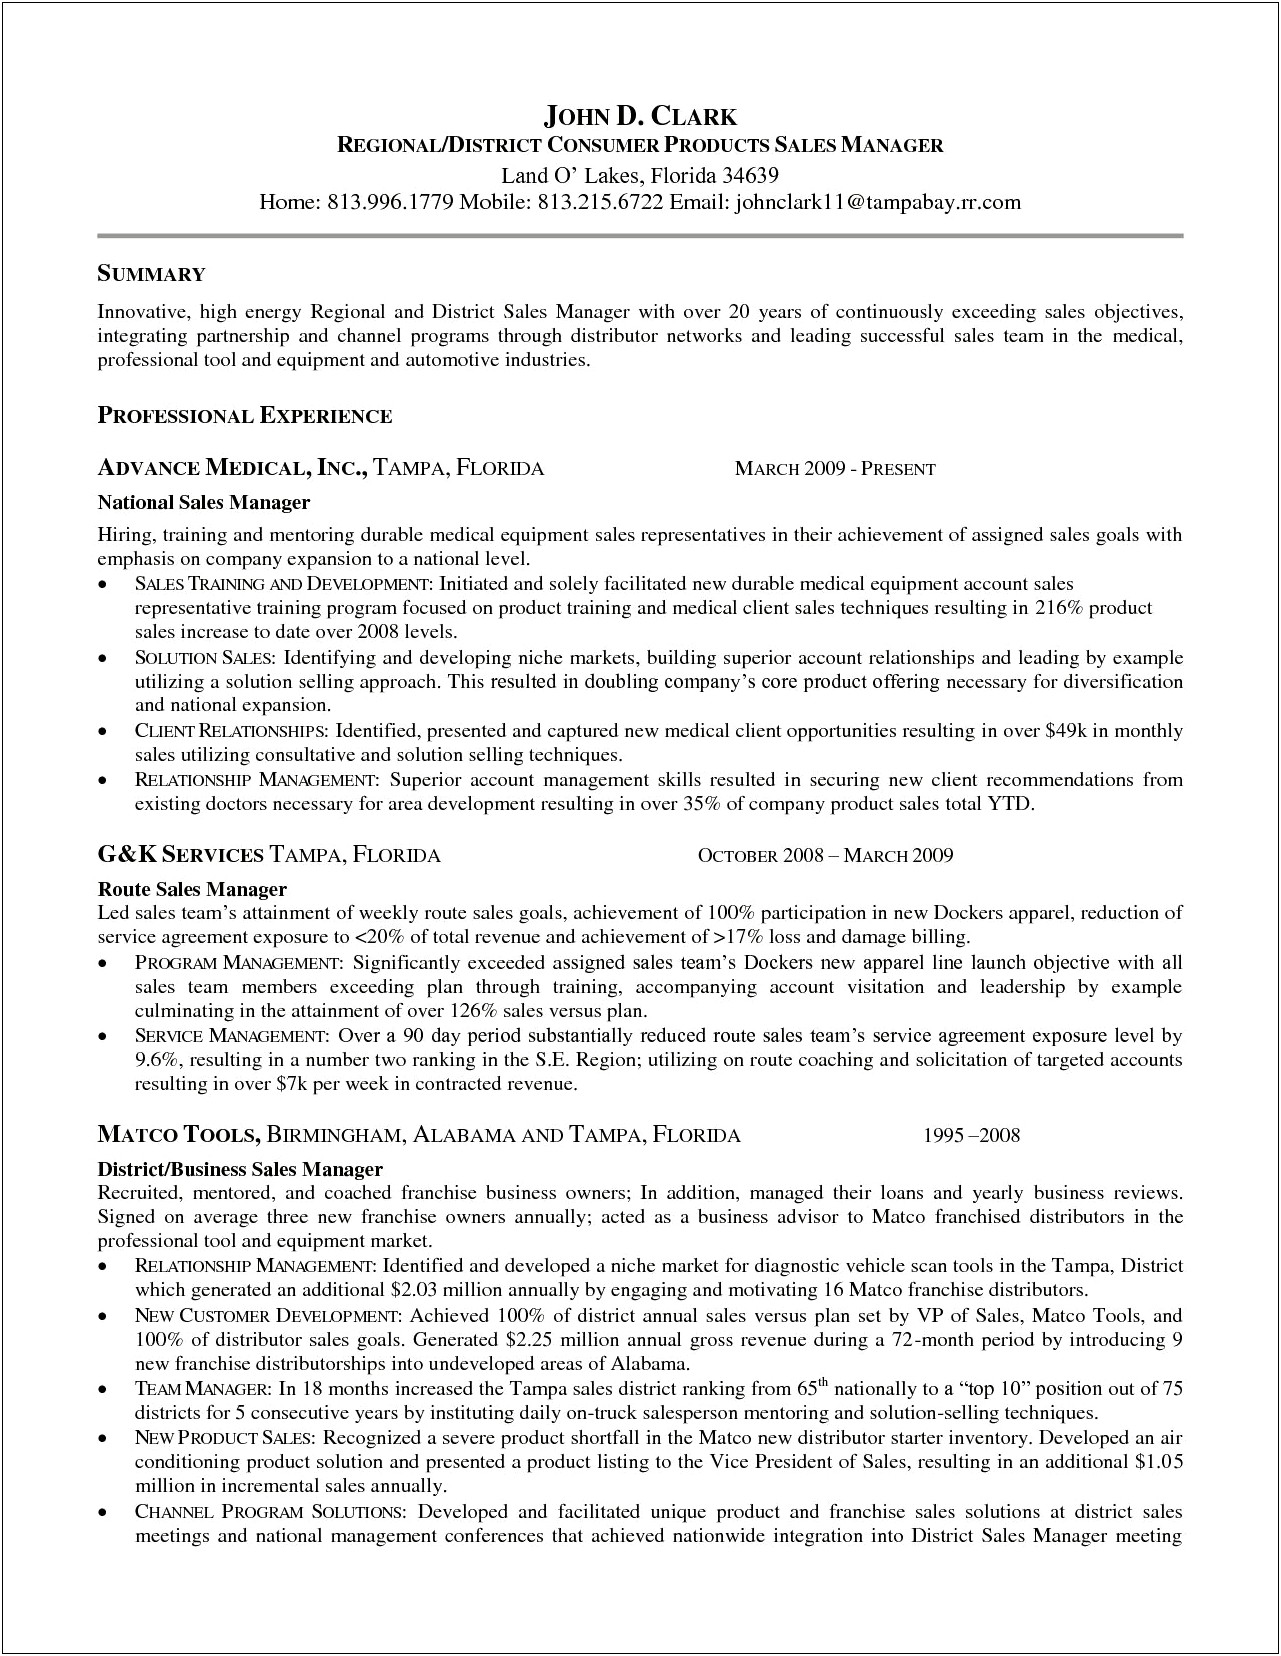 Resume Objective Ideas For Management